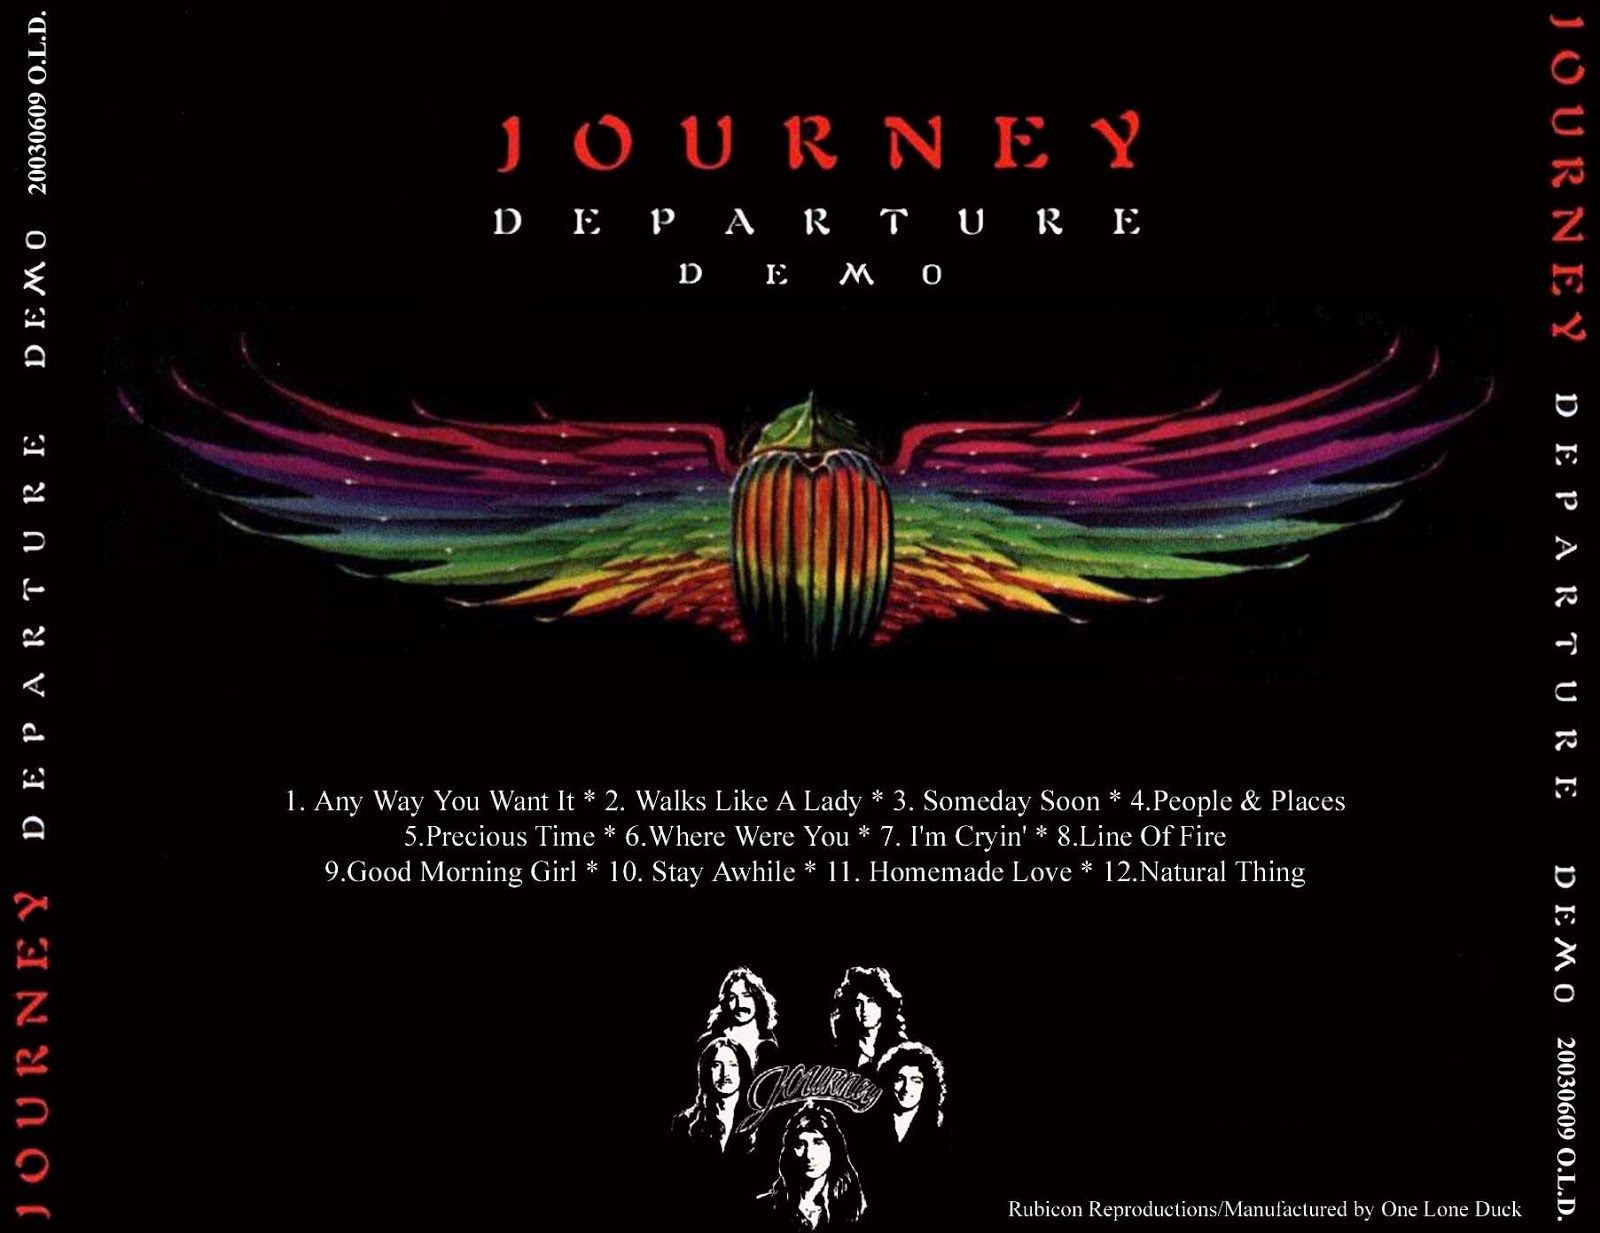 journey cover band departure